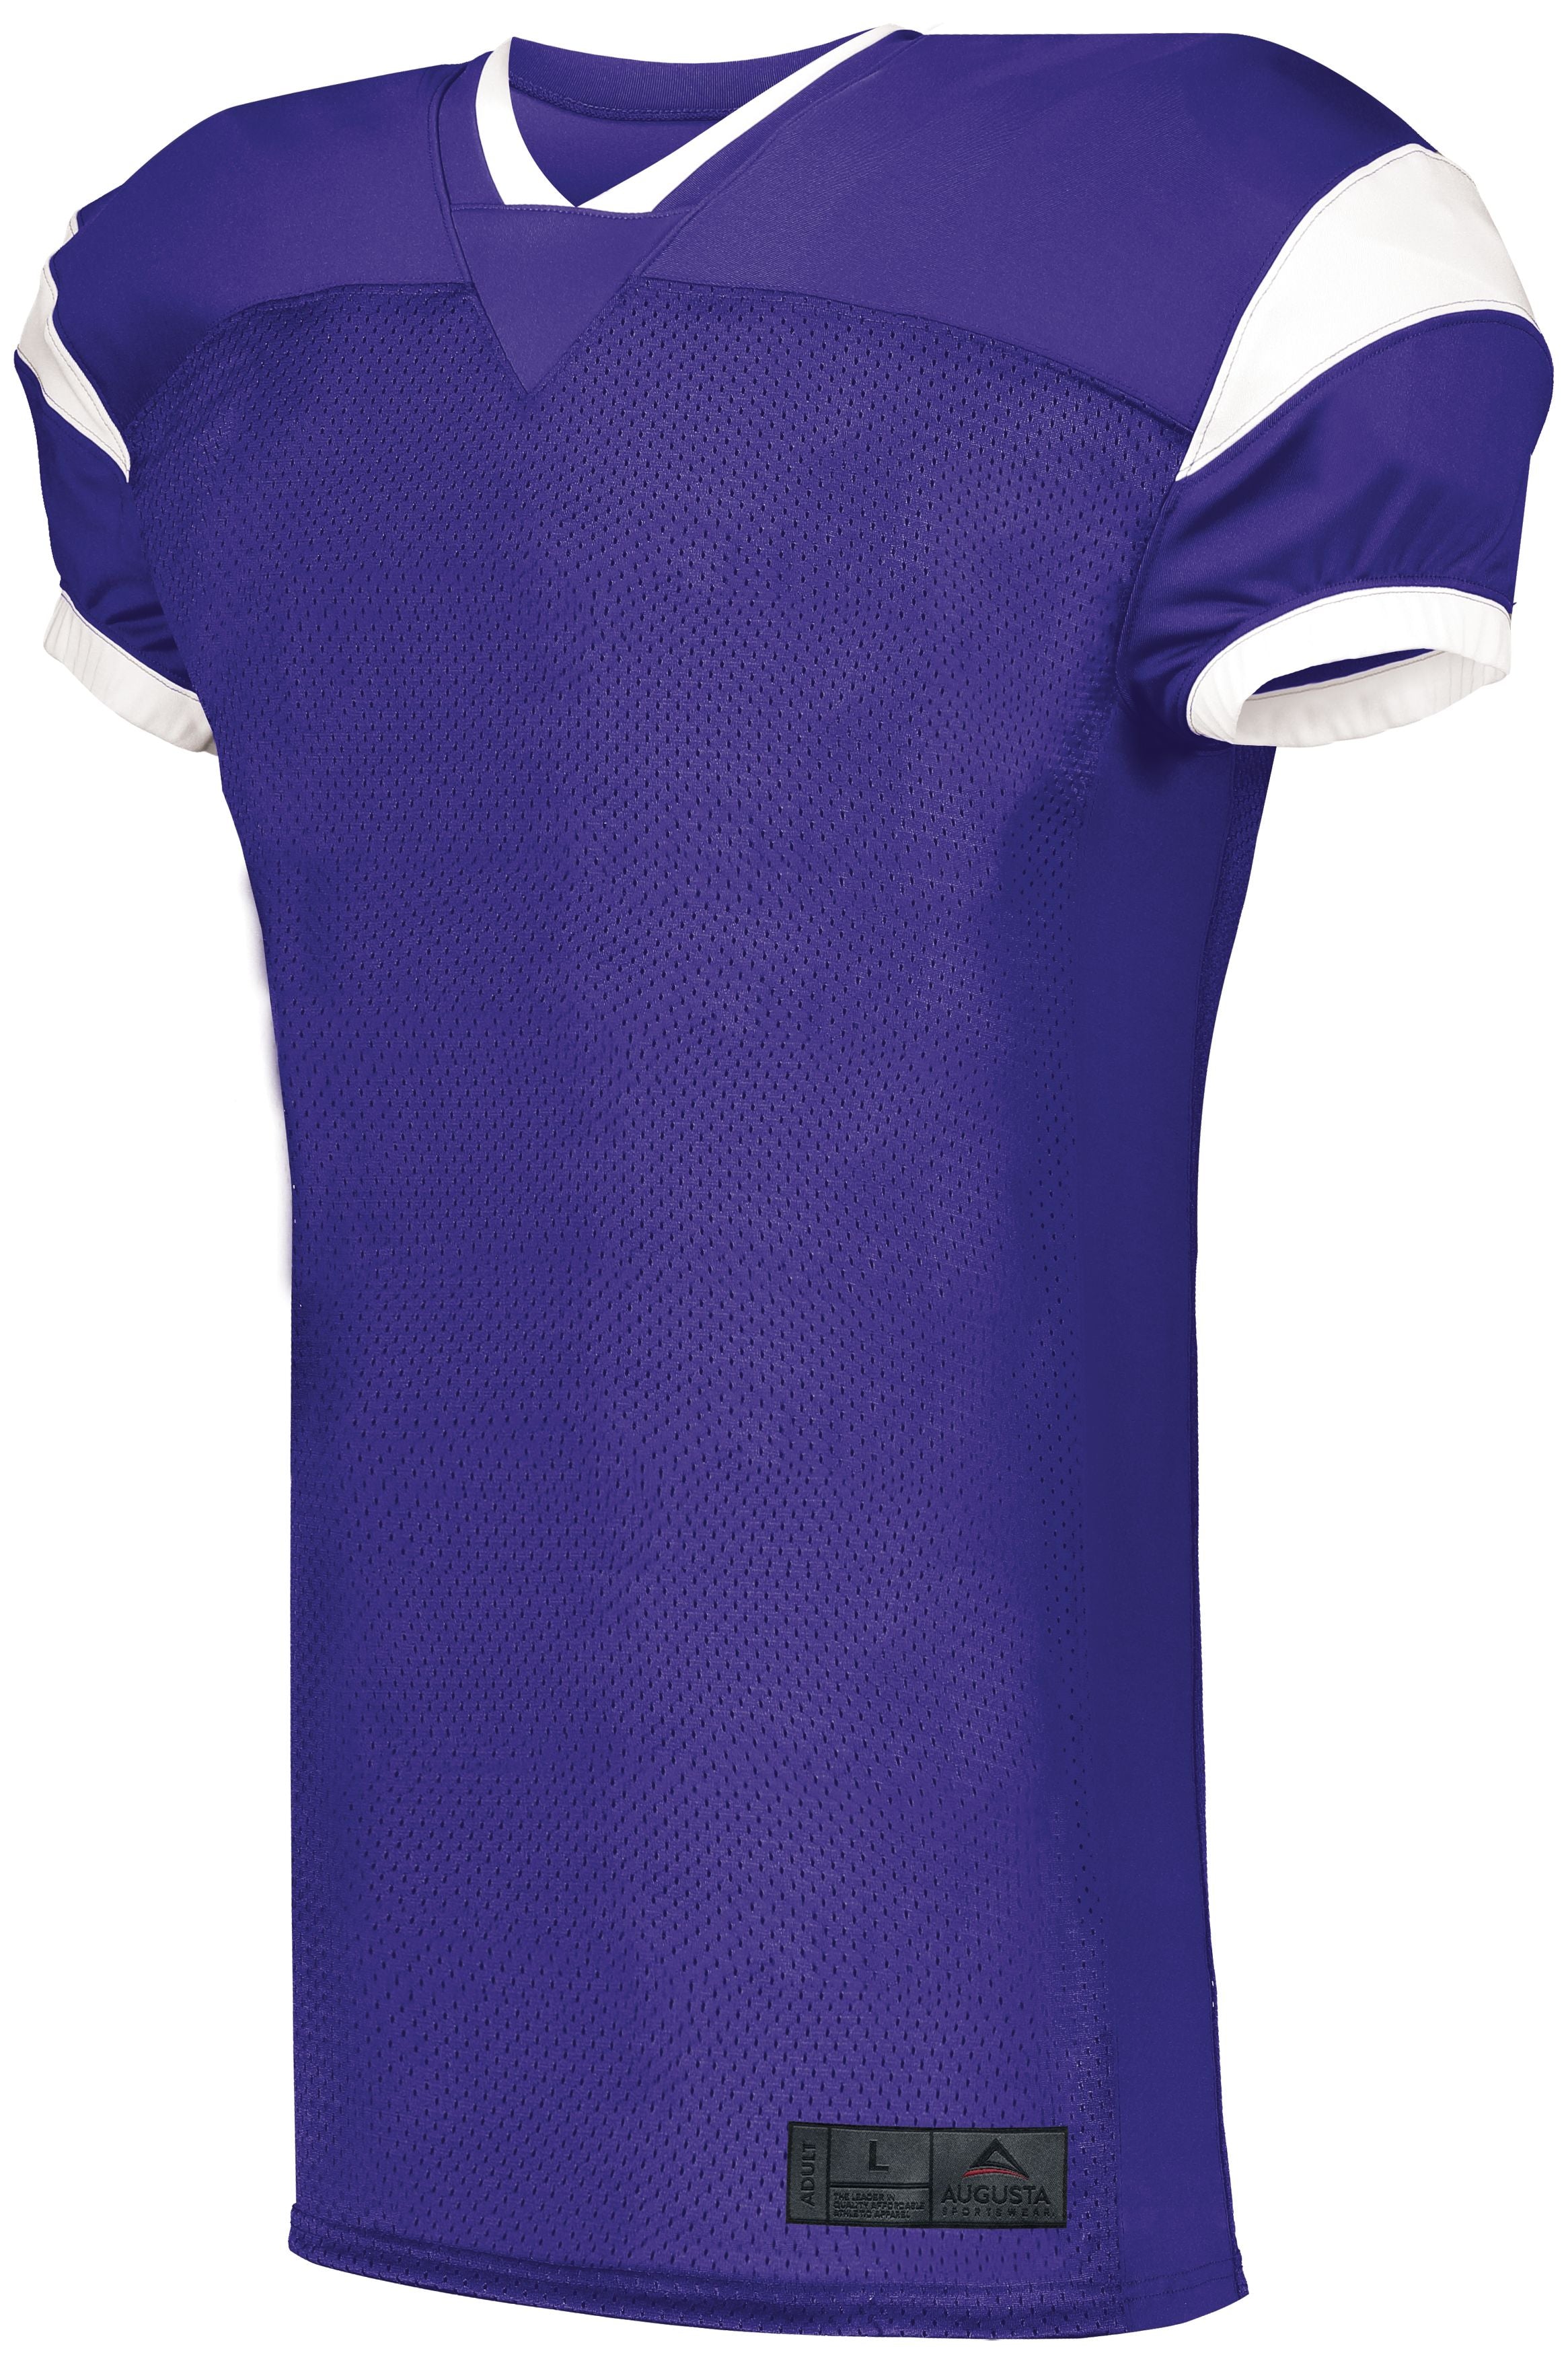 Augusta Sportswear Slant Football Jersey in Purple/White  -Part of the Adult, Adult-Jersey, Augusta-Products, Football, Shirts, All-Sports, All-Sports-1 product lines at KanaleyCreations.com